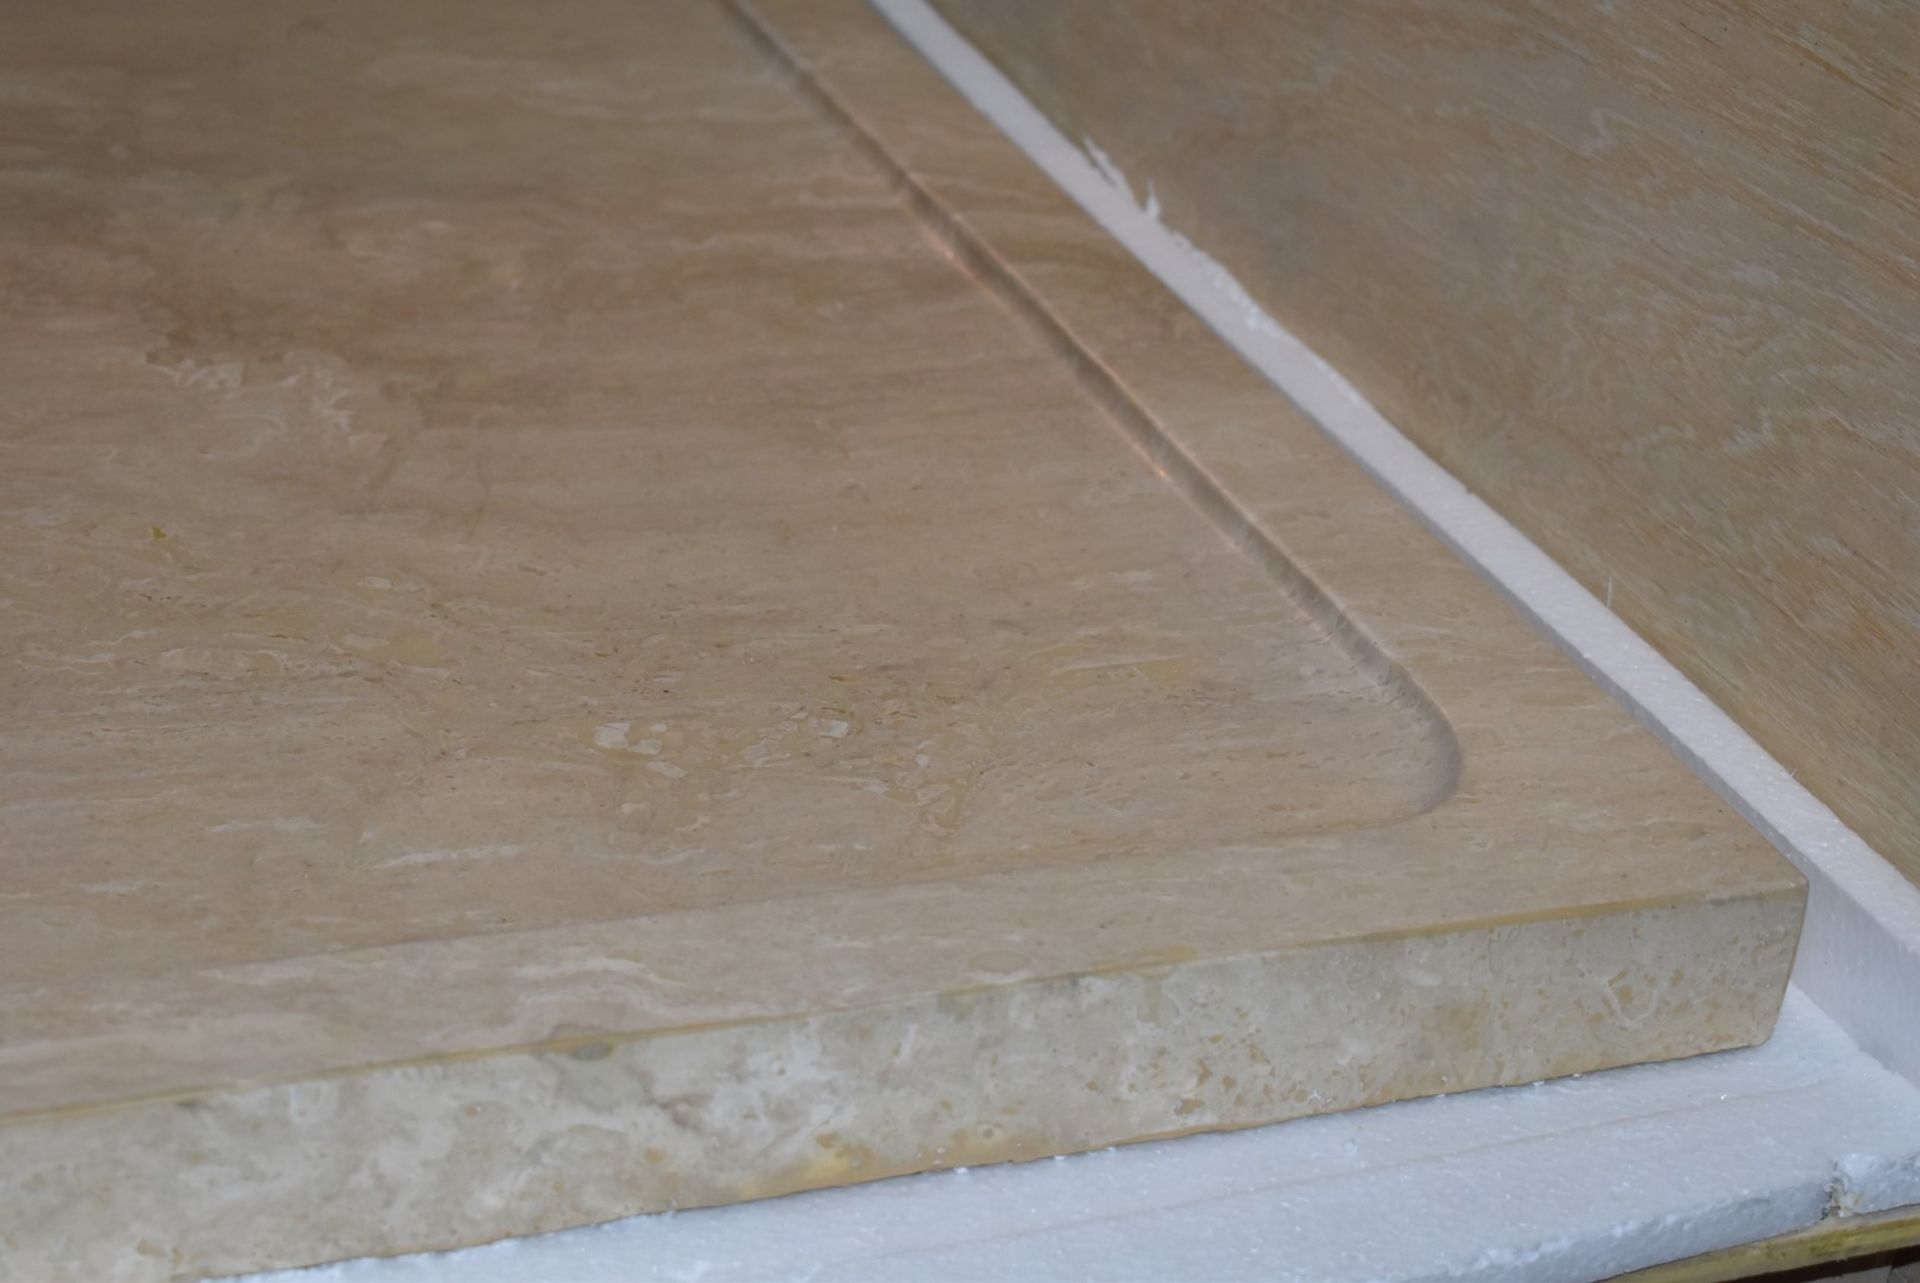 1 x Stonearth Luxury Solid Travertine Stone 900mm Shower Tray - Hand Made From Travertine Stone - Image 12 of 12